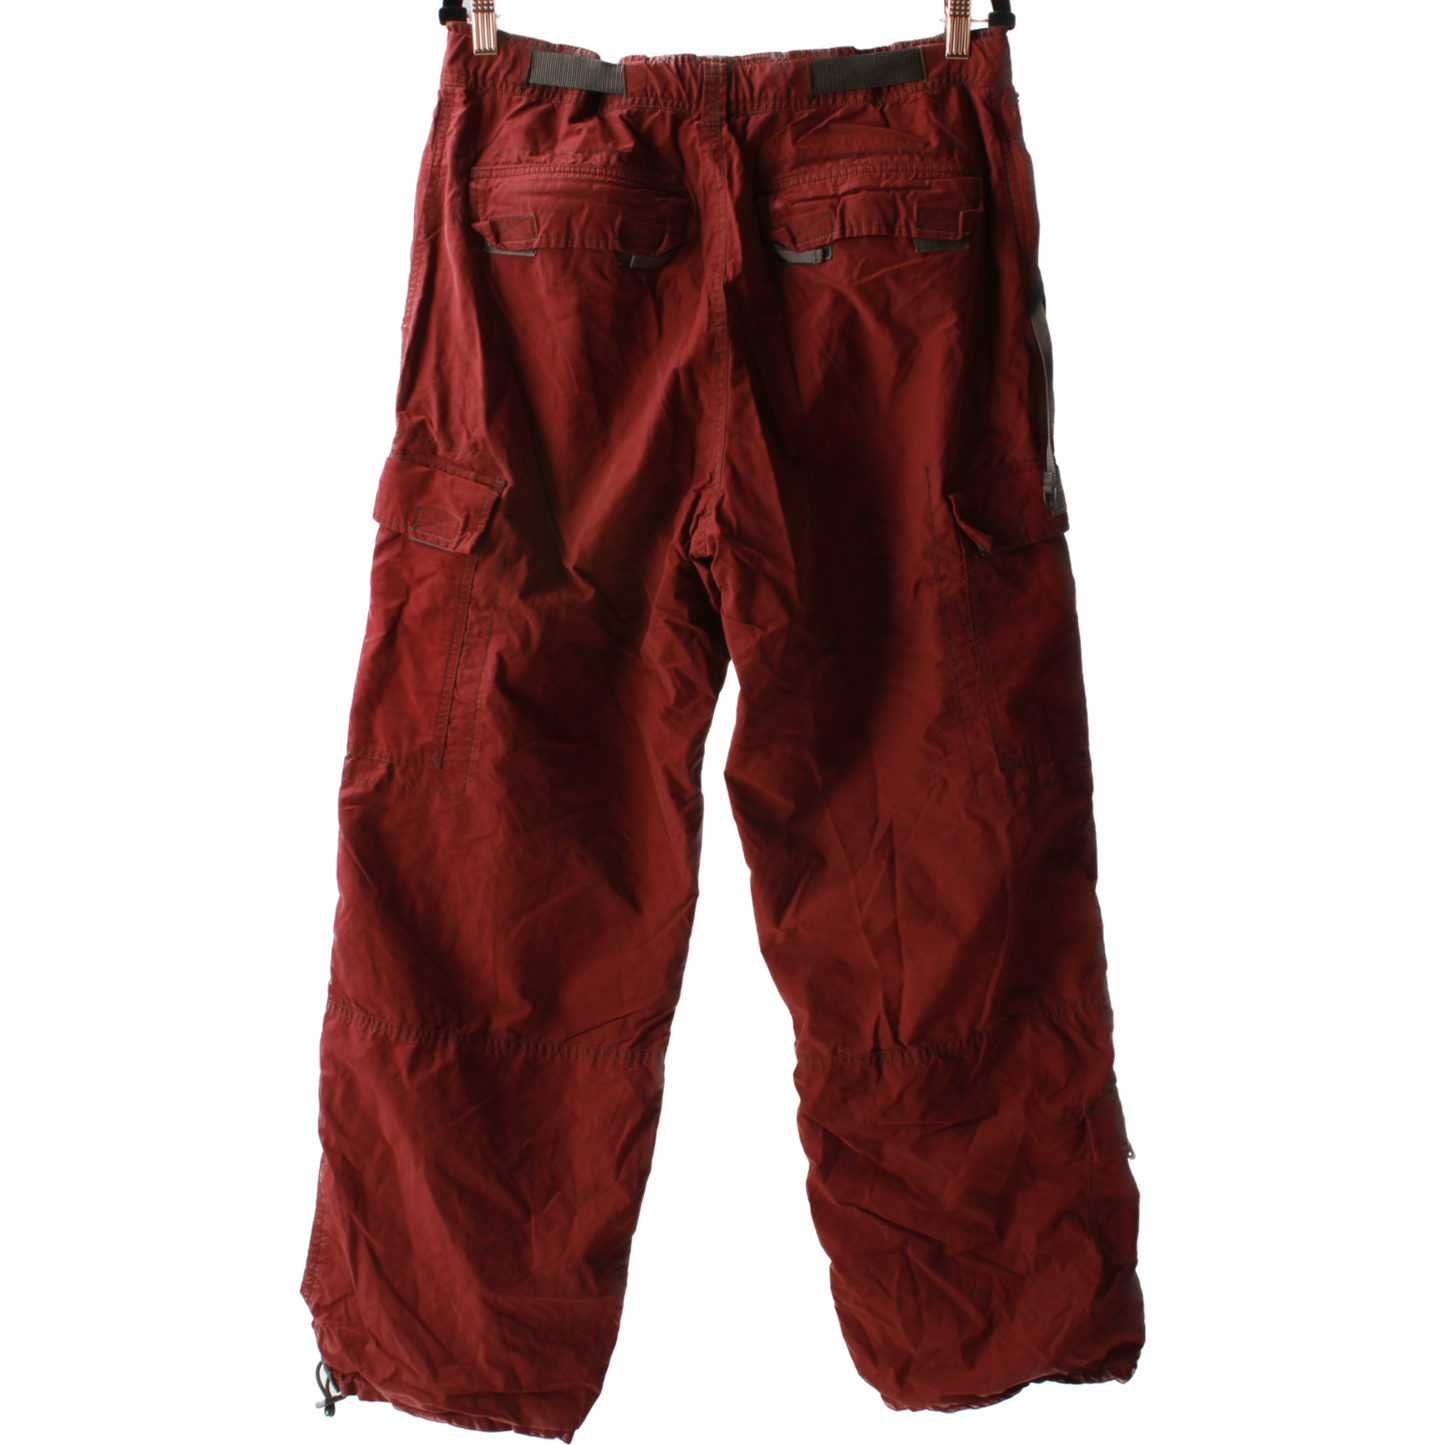 Red Cargo Pants